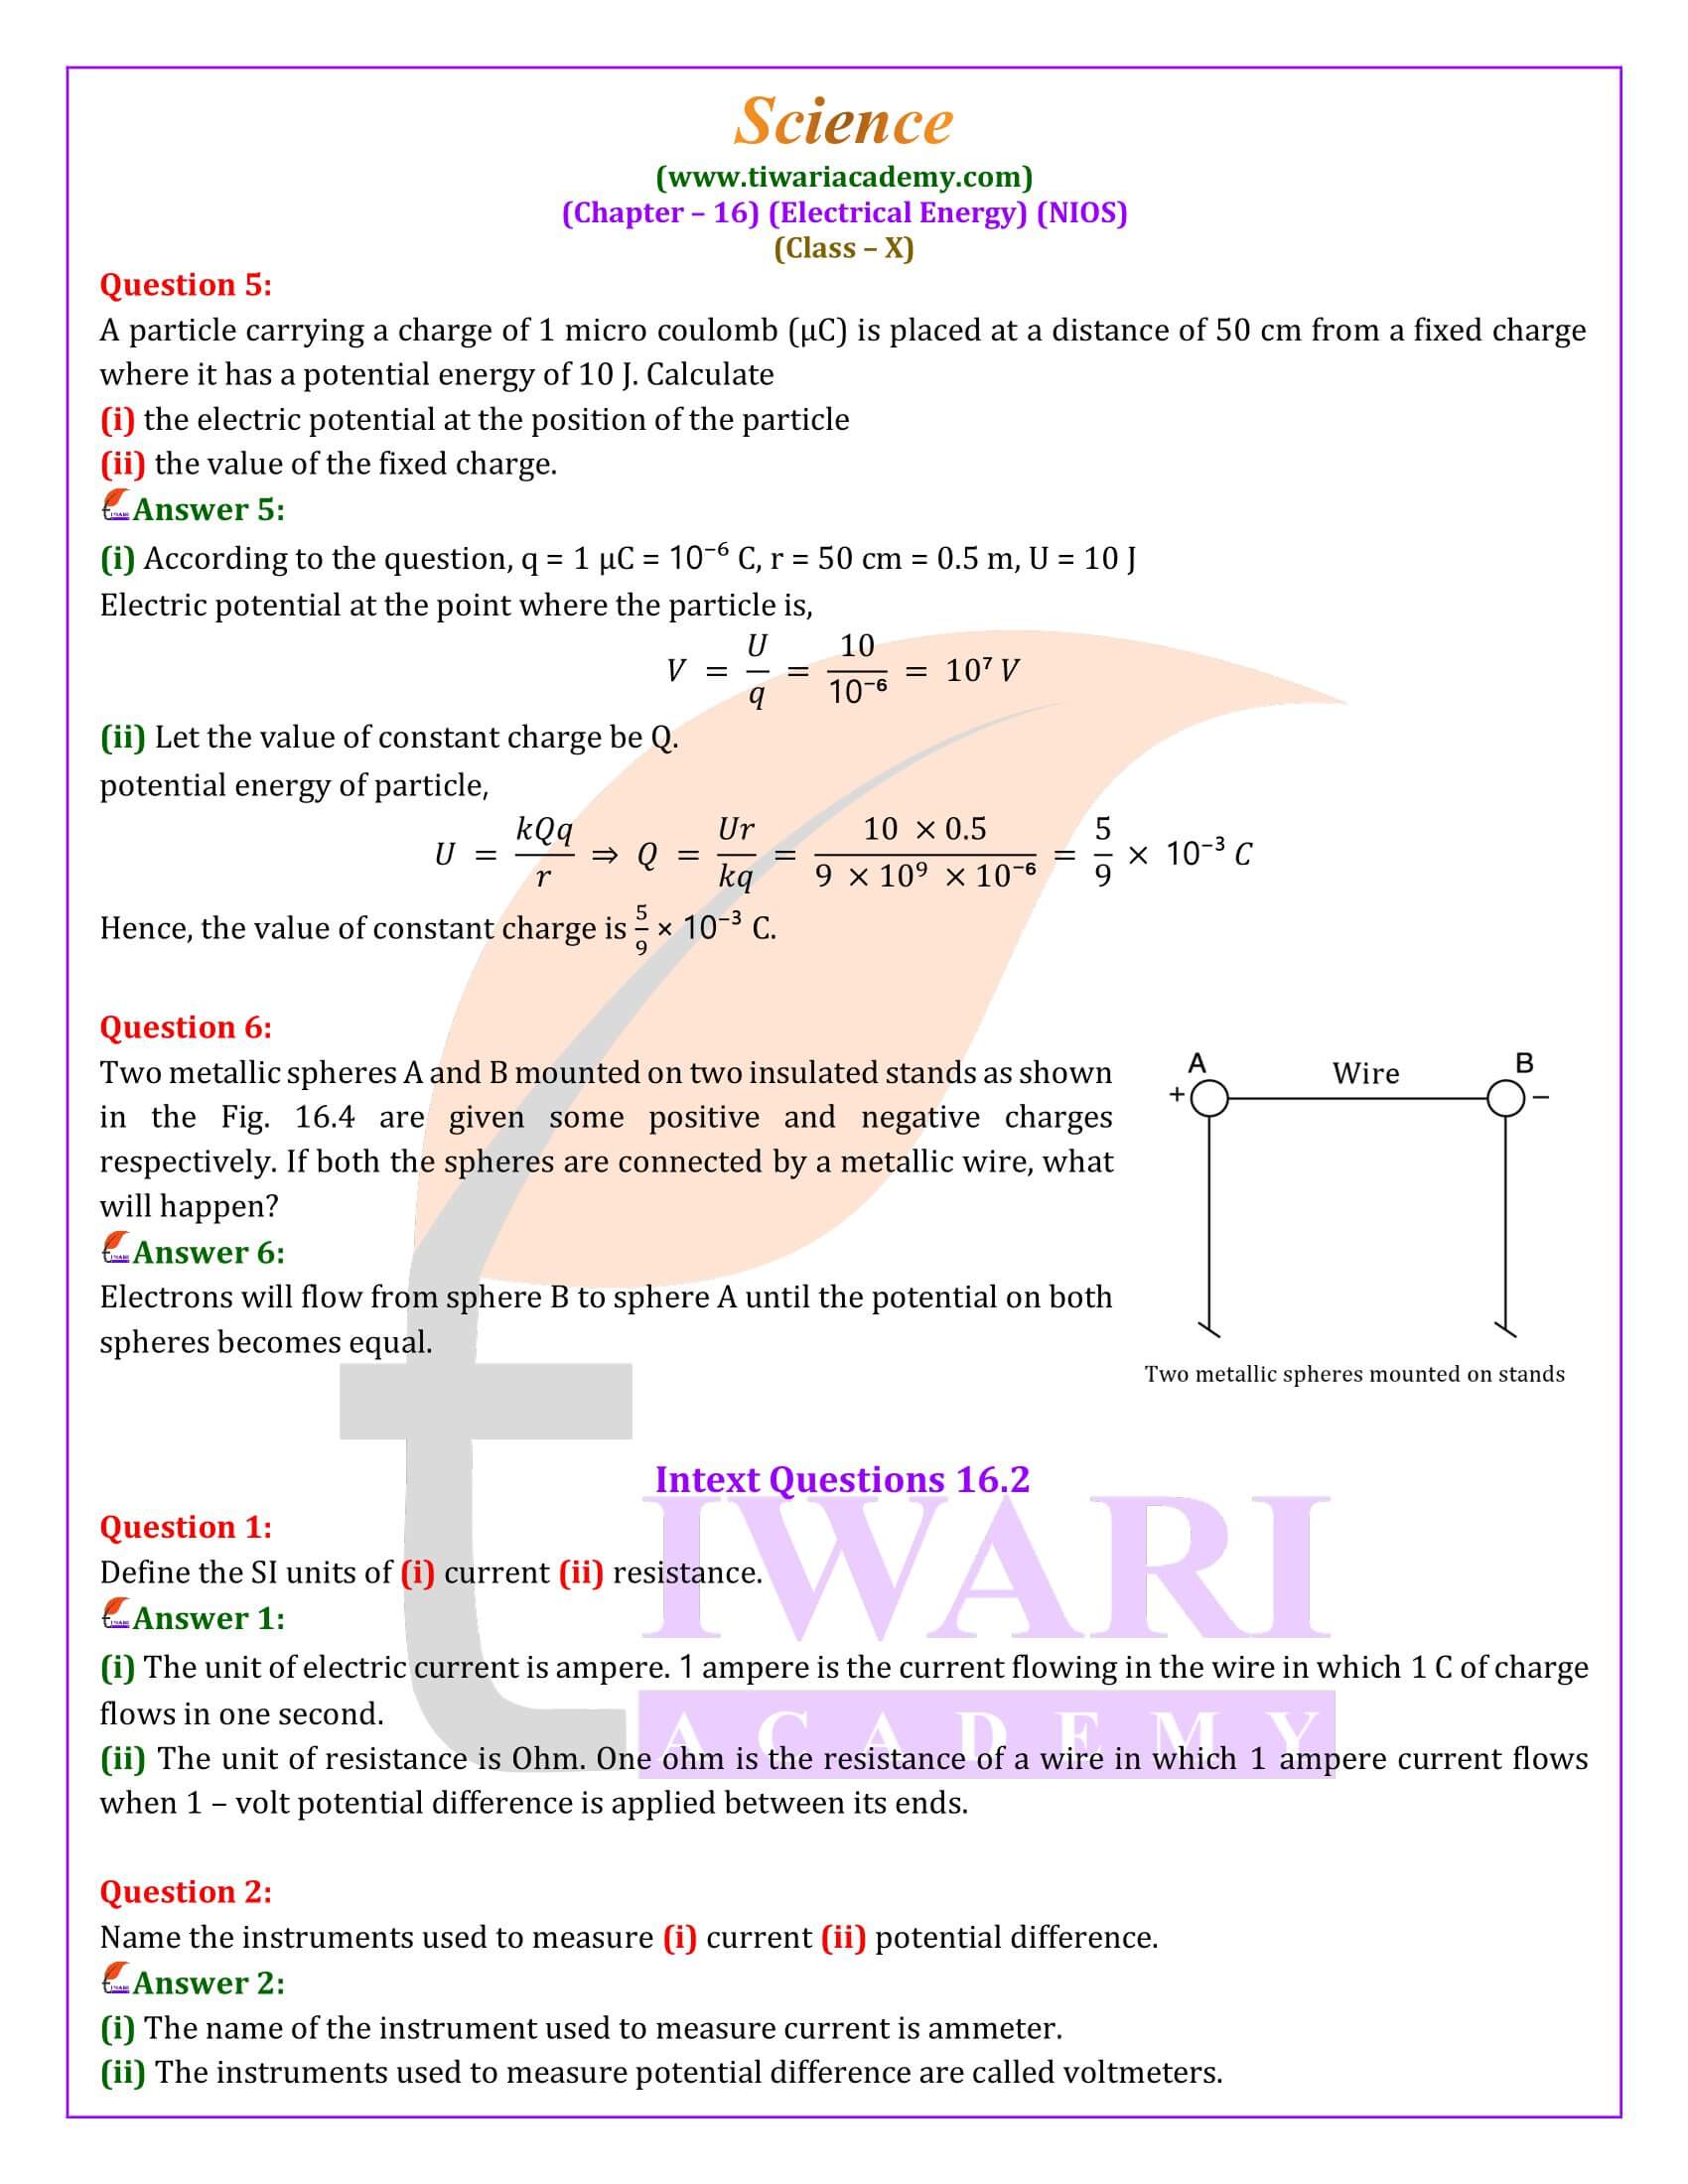 NIOS Class 10 Science Chapter 16 Electrical Energy Guide